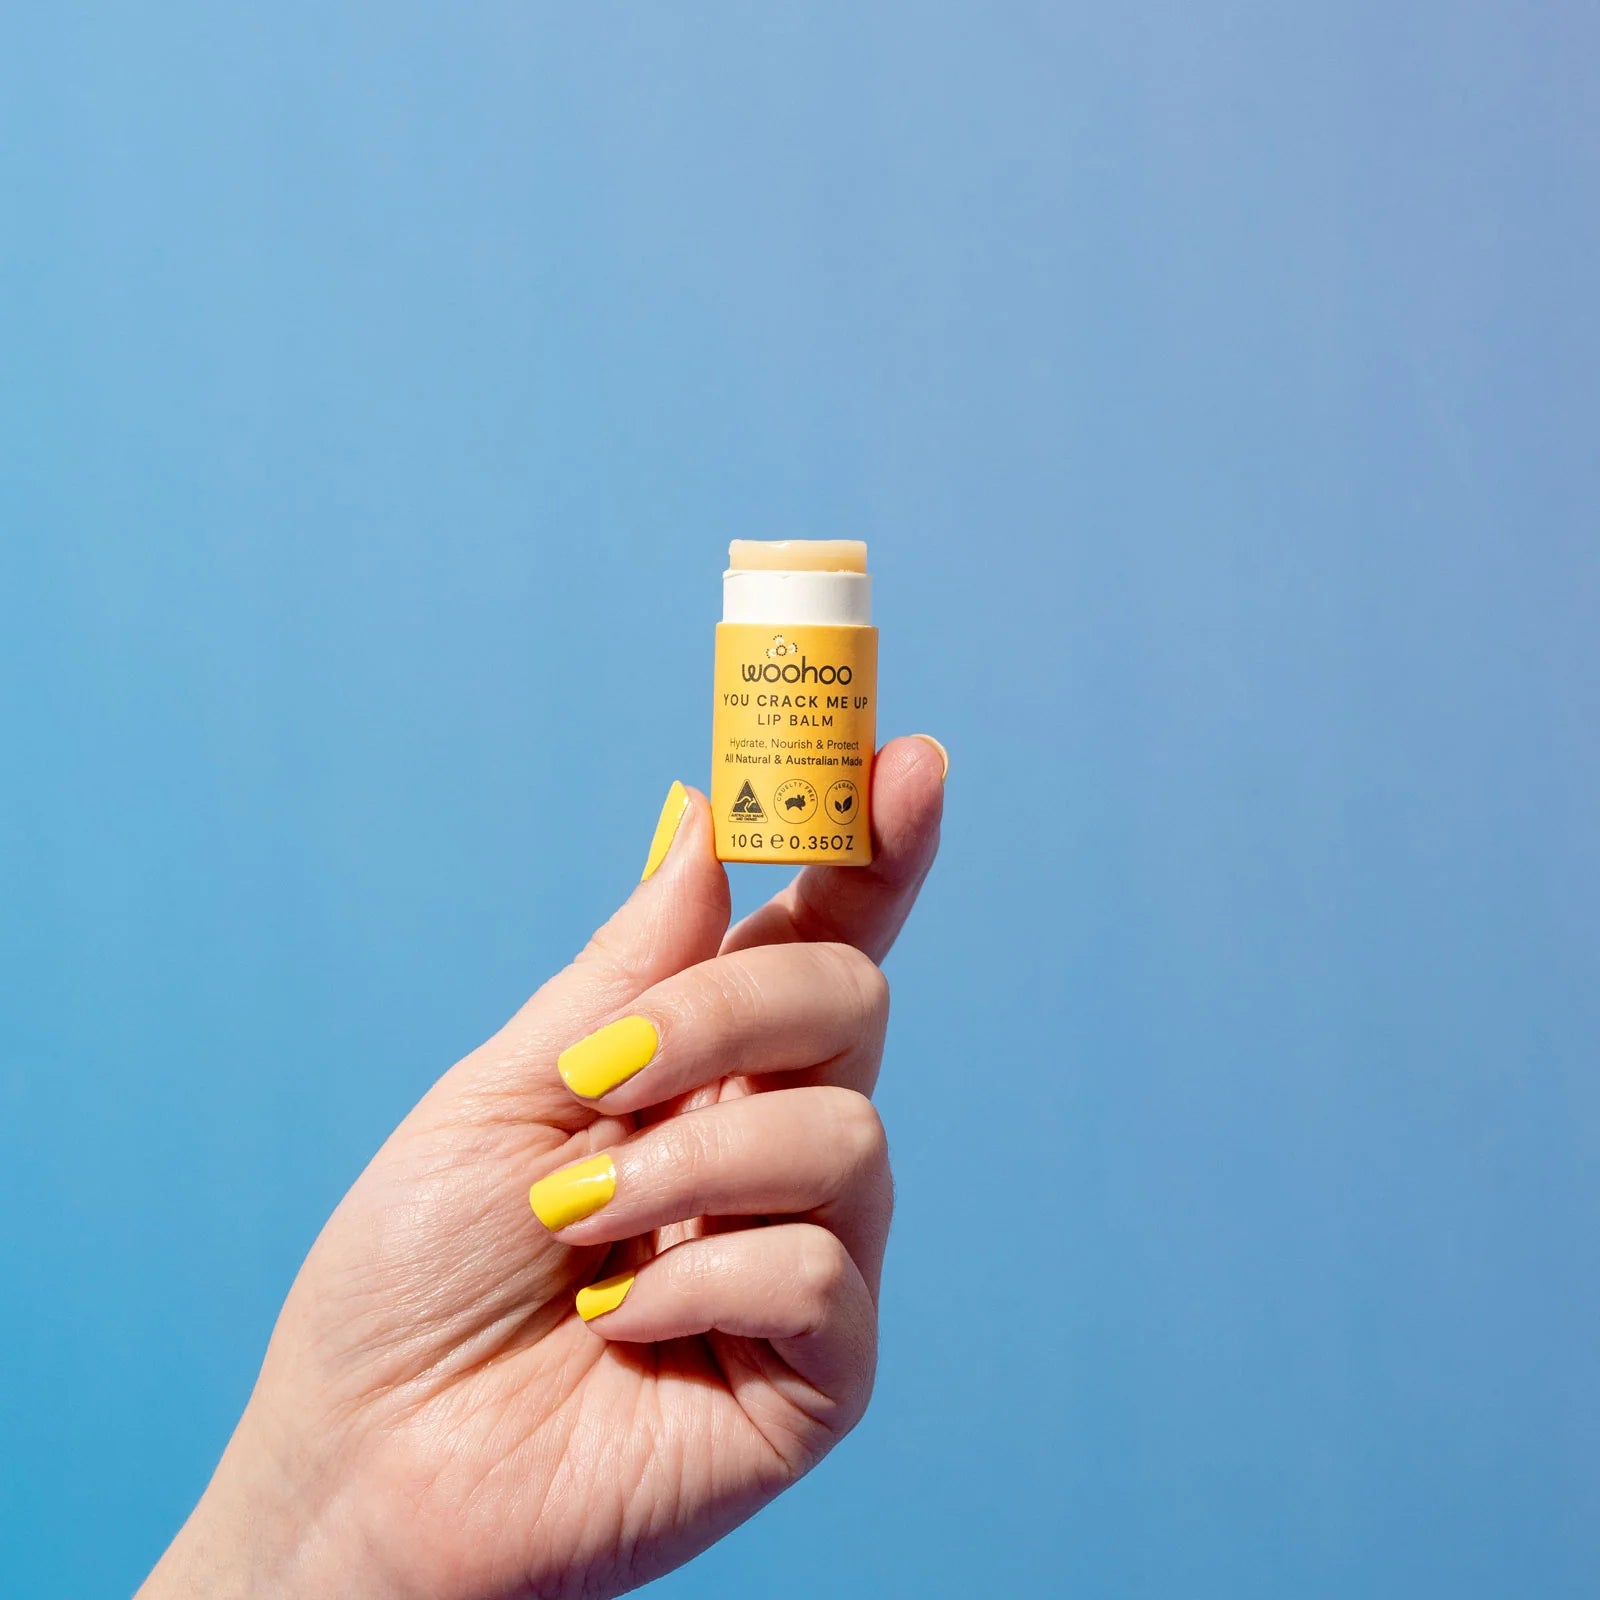 Image of an opened Woohoo You Crack Me Up! Lip Balm being held in a hand on a blue background